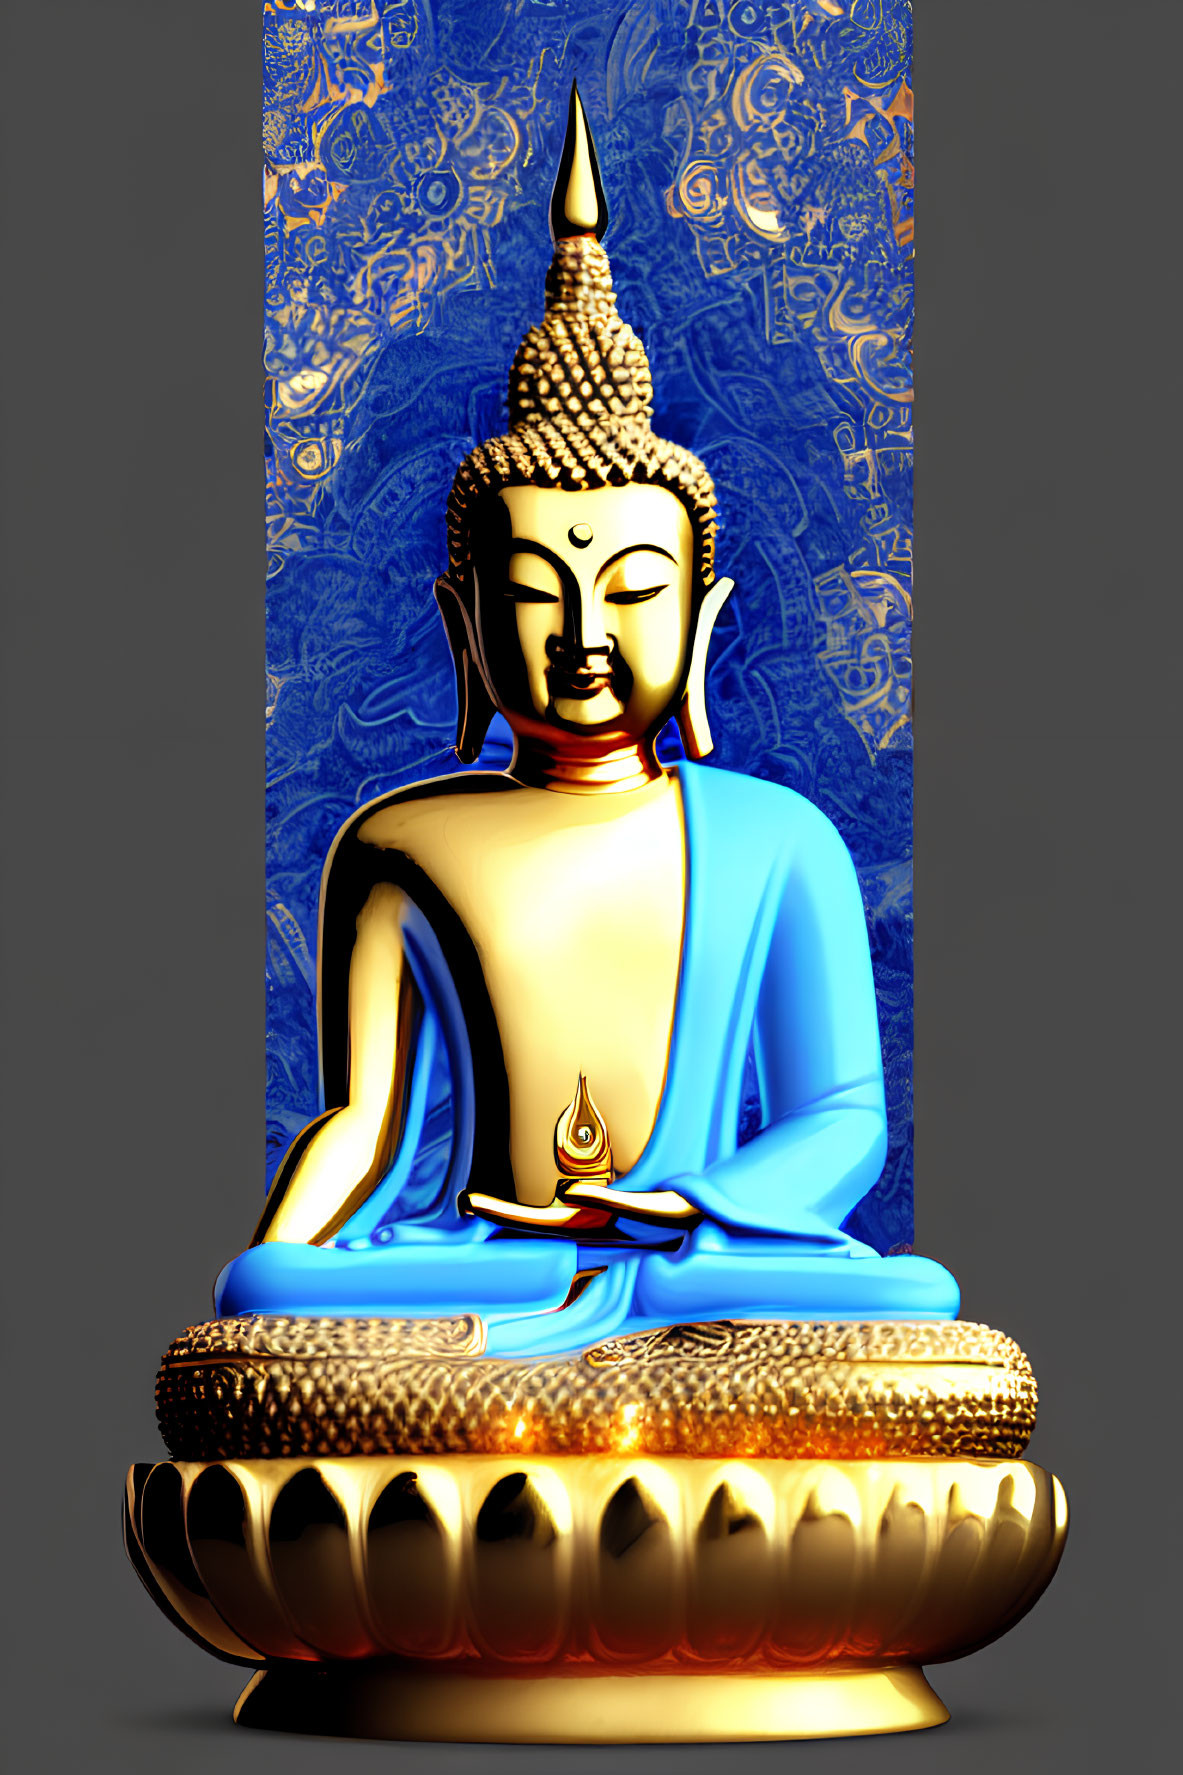 Golden Buddha Statue Seated in Lotus Position on Blue Background